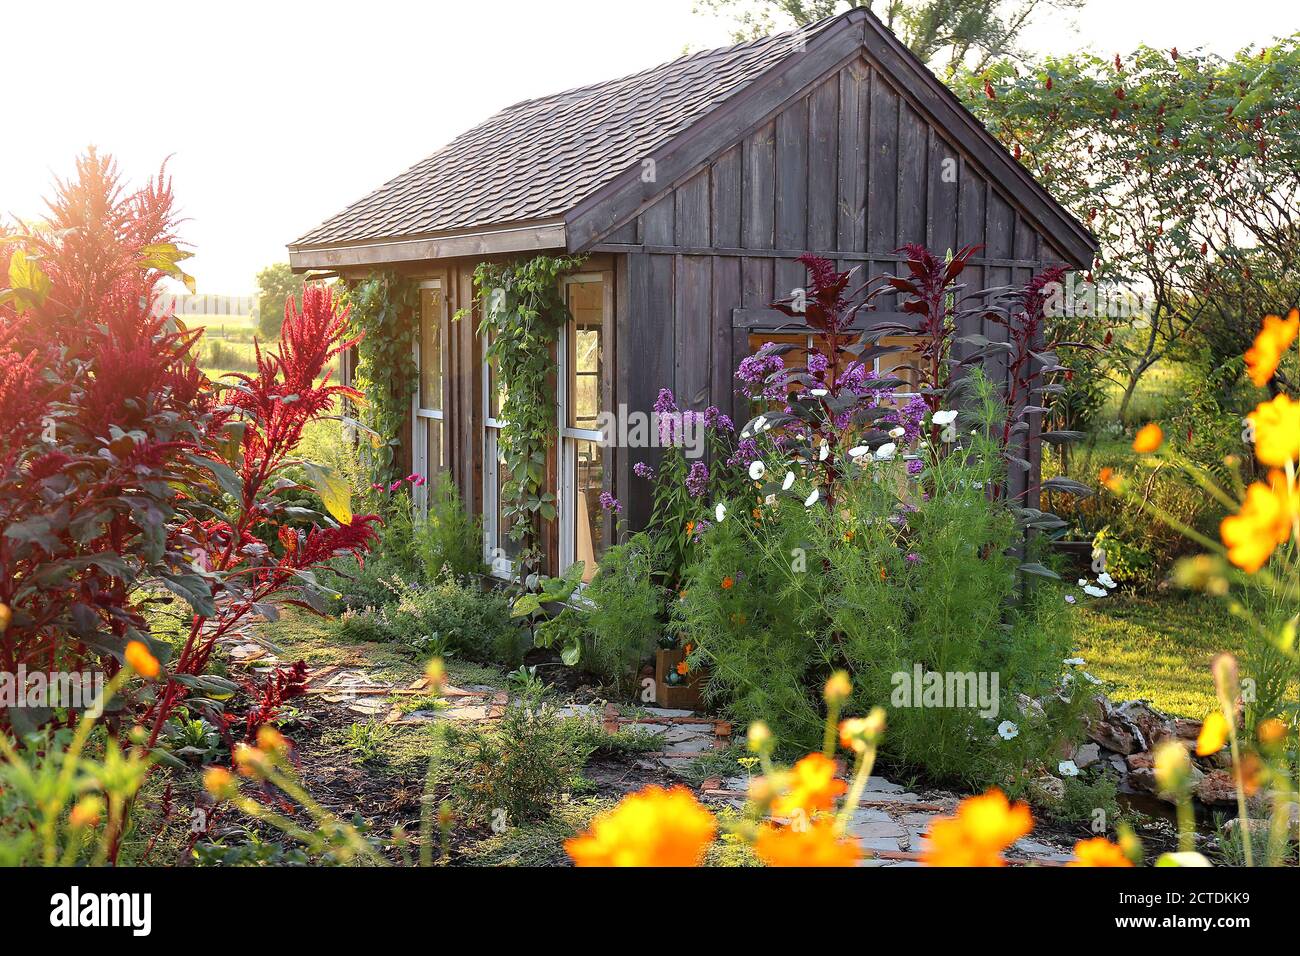 A Rustic little wooden cottage style garden shed is surrounded by beautiful, colorful summer flowers. Stock Photo